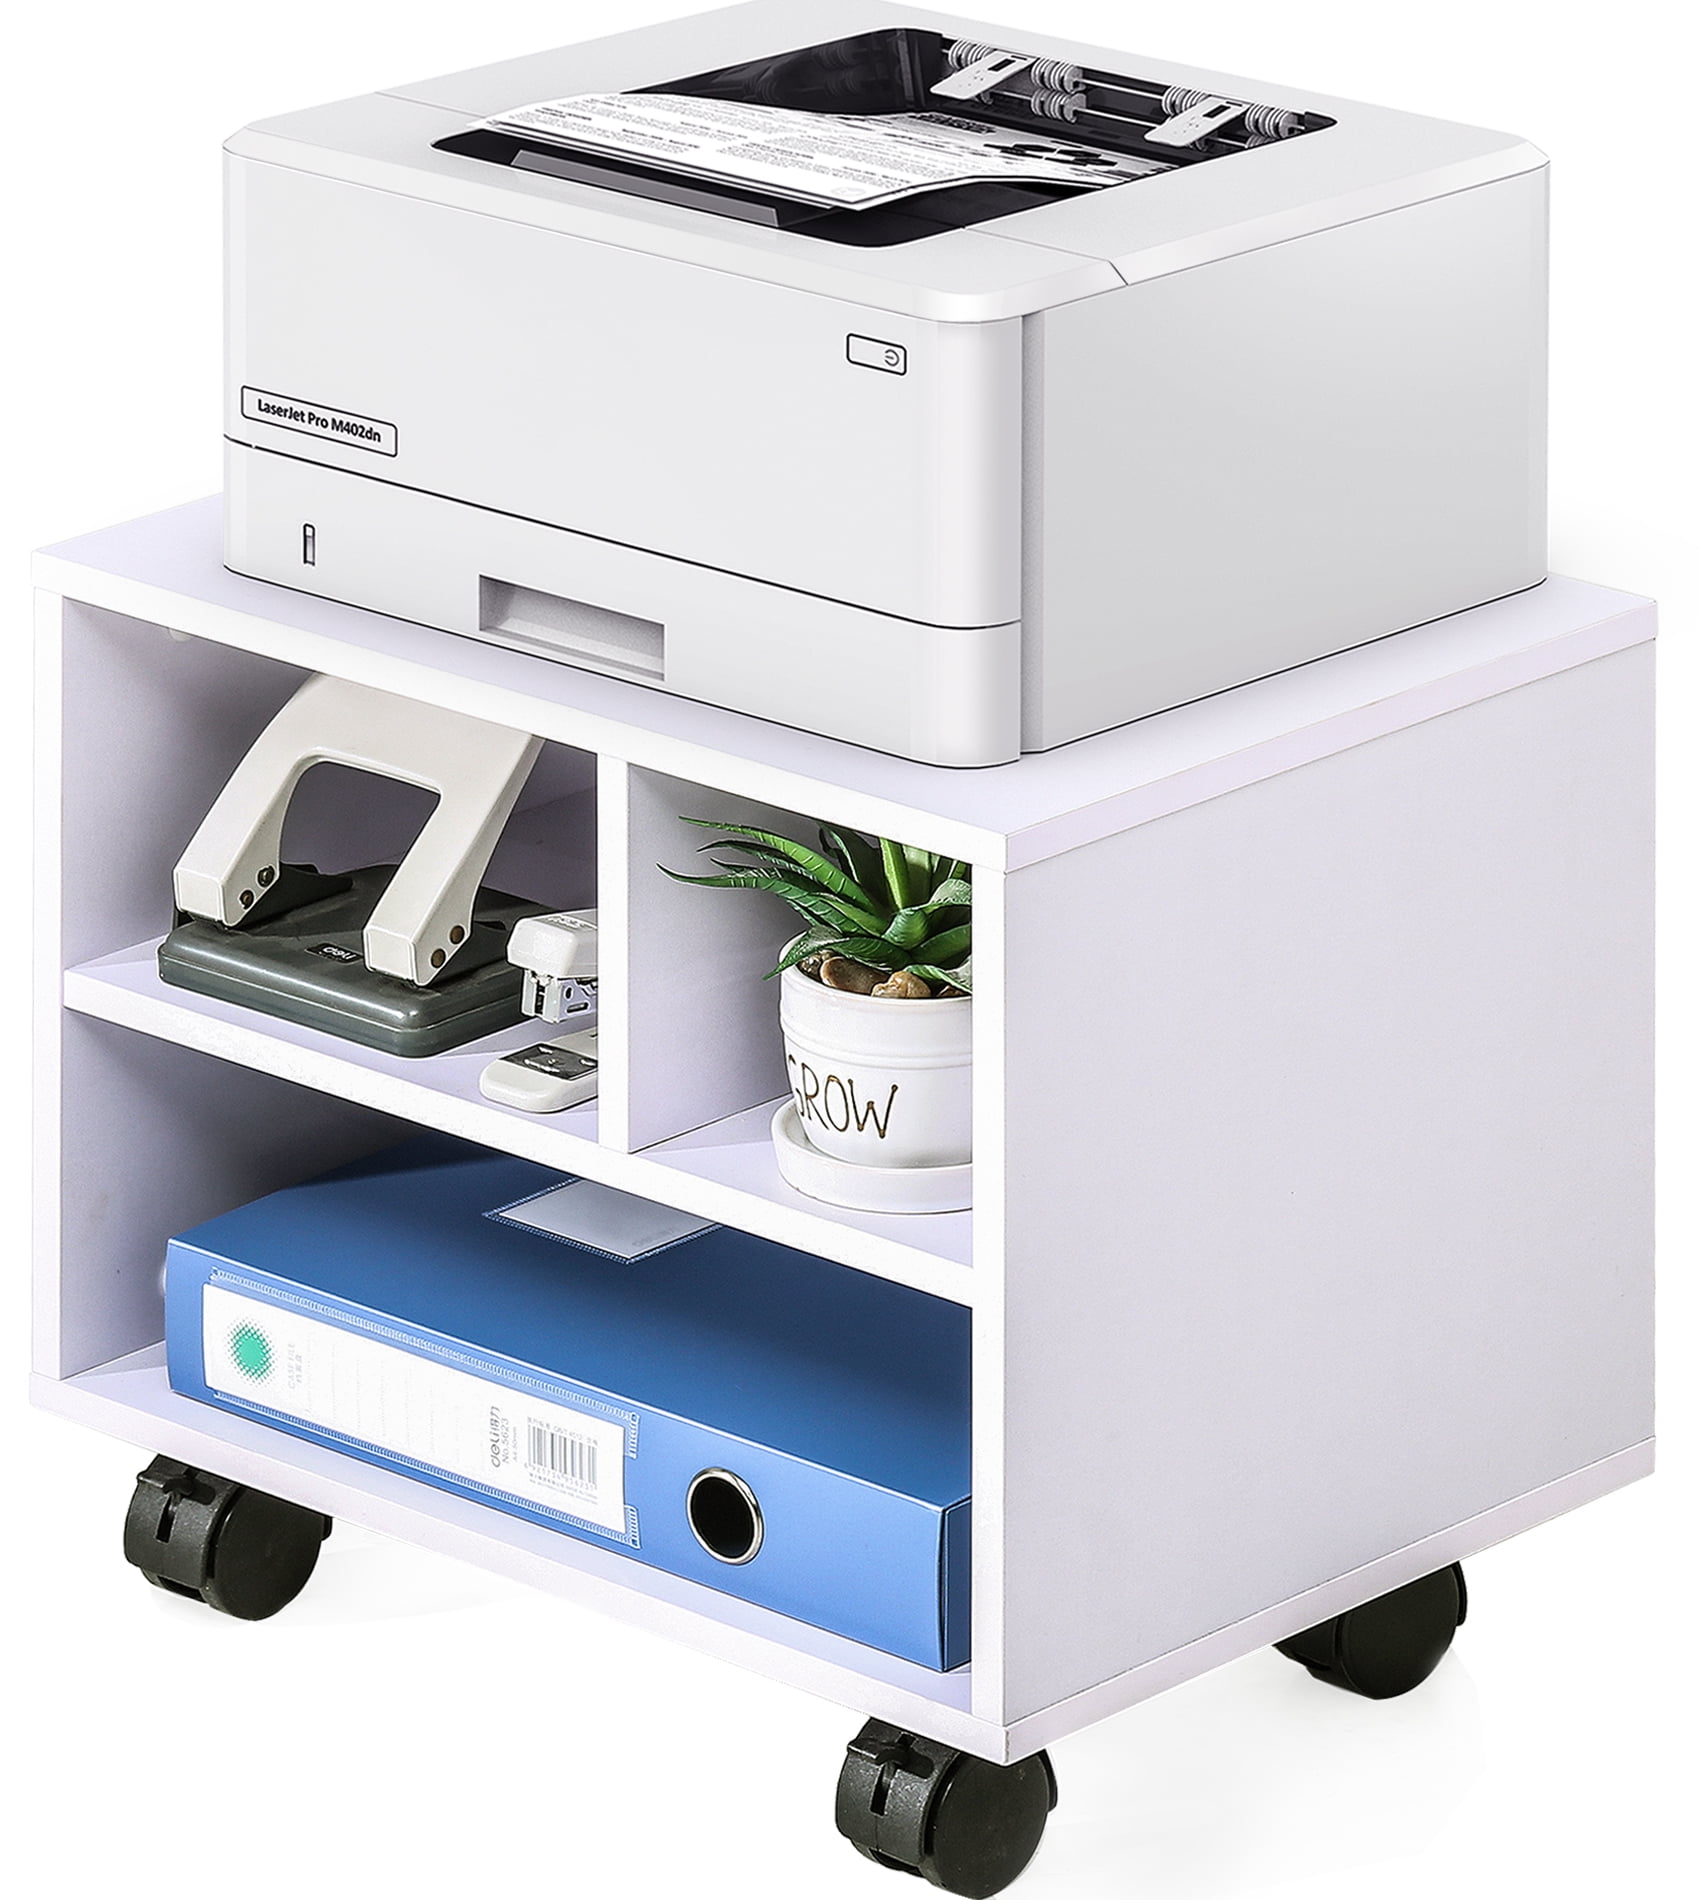 Details about   Printer Stand Compact 2 Shelf Locking Wheels Scanner Computer Office Supplies 